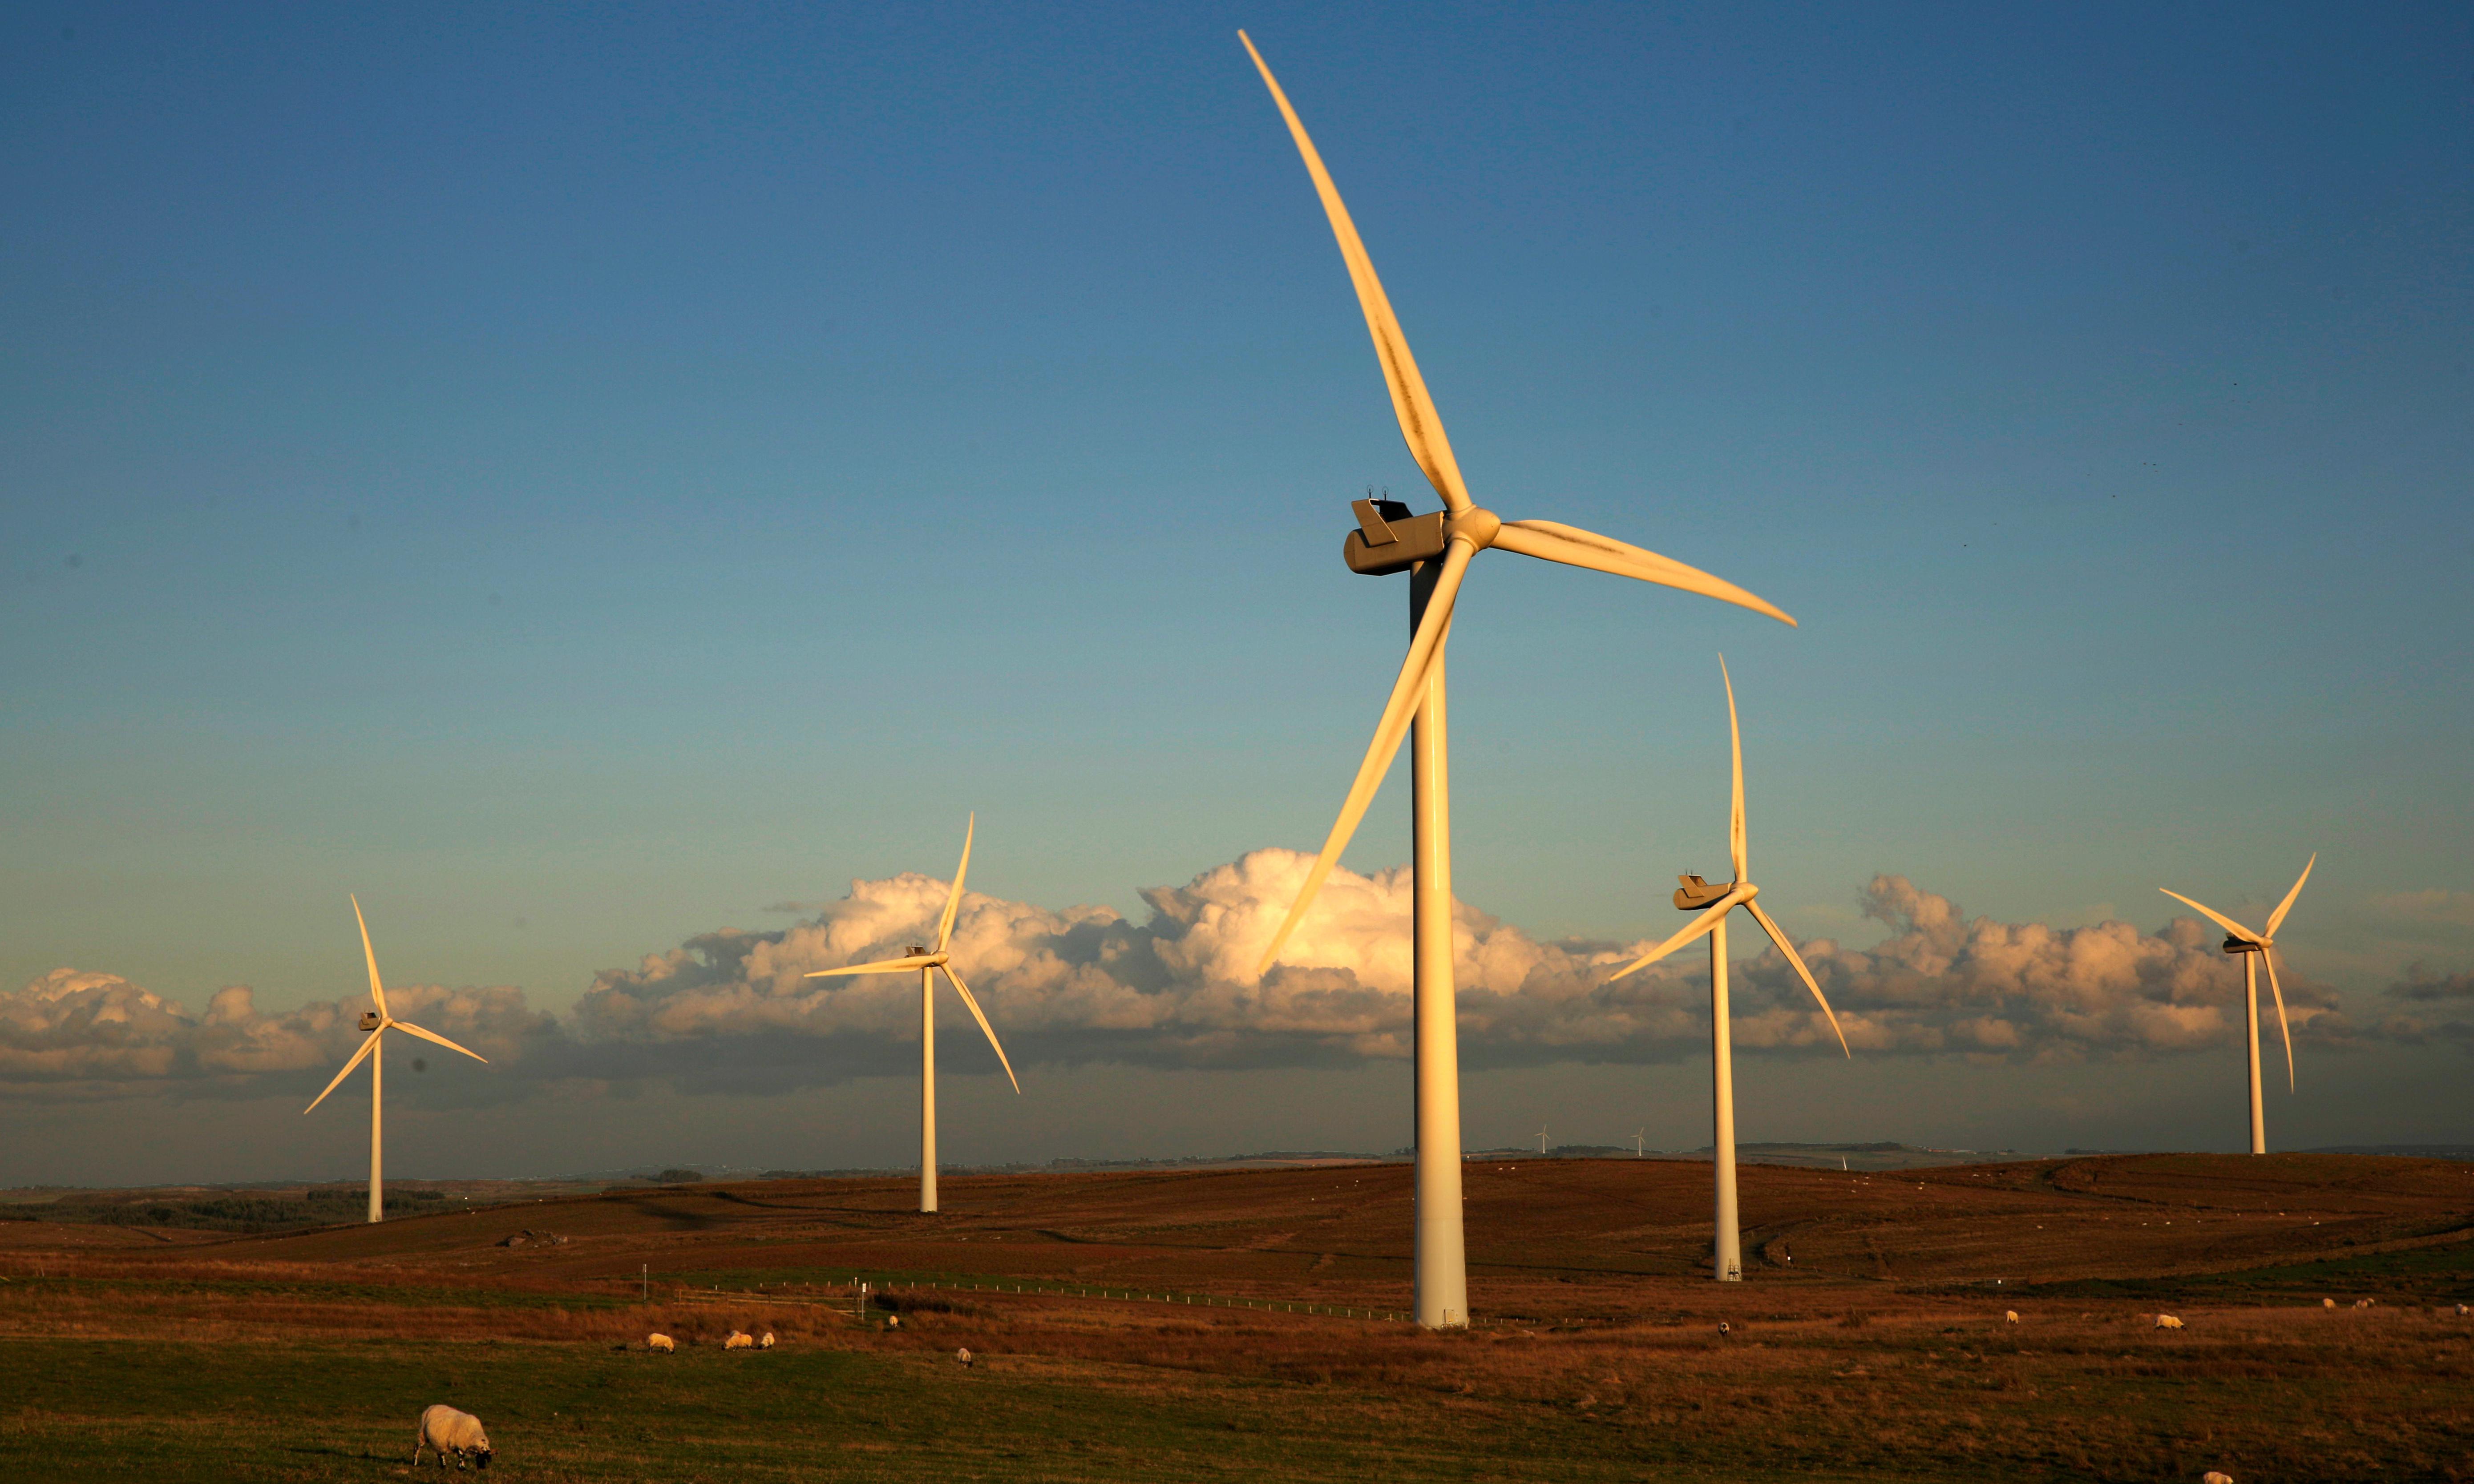 Johnson to defy cabinet fears and push for onshore wind expansion